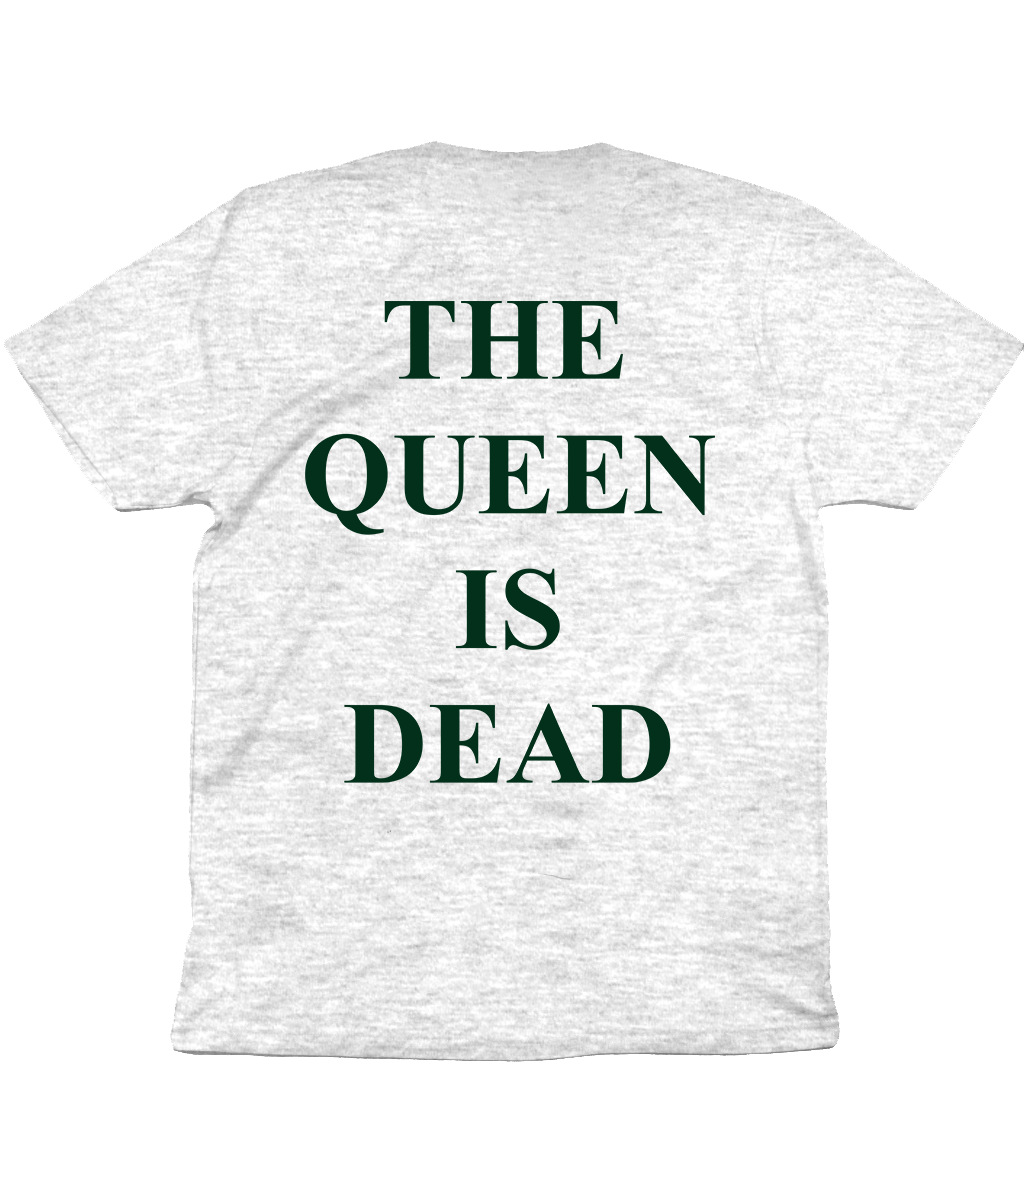 The Smiths - THE QUEEN IS DEAD - Back Print